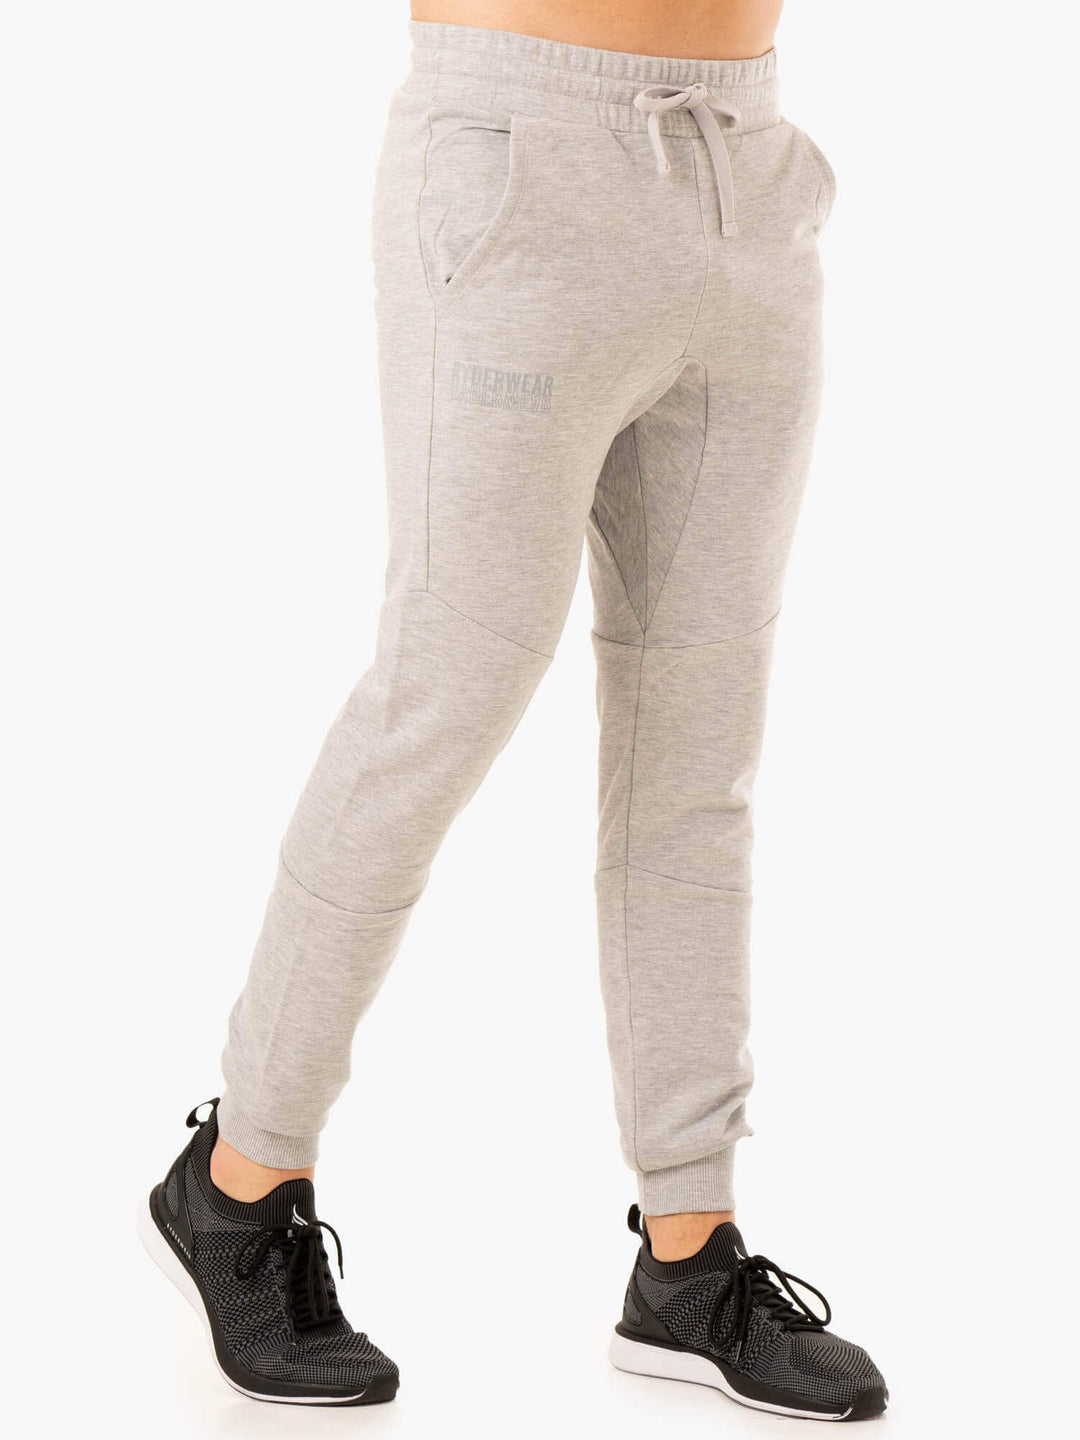 Limitless Track Pant - Grey Marl Clothing Ryderwear 